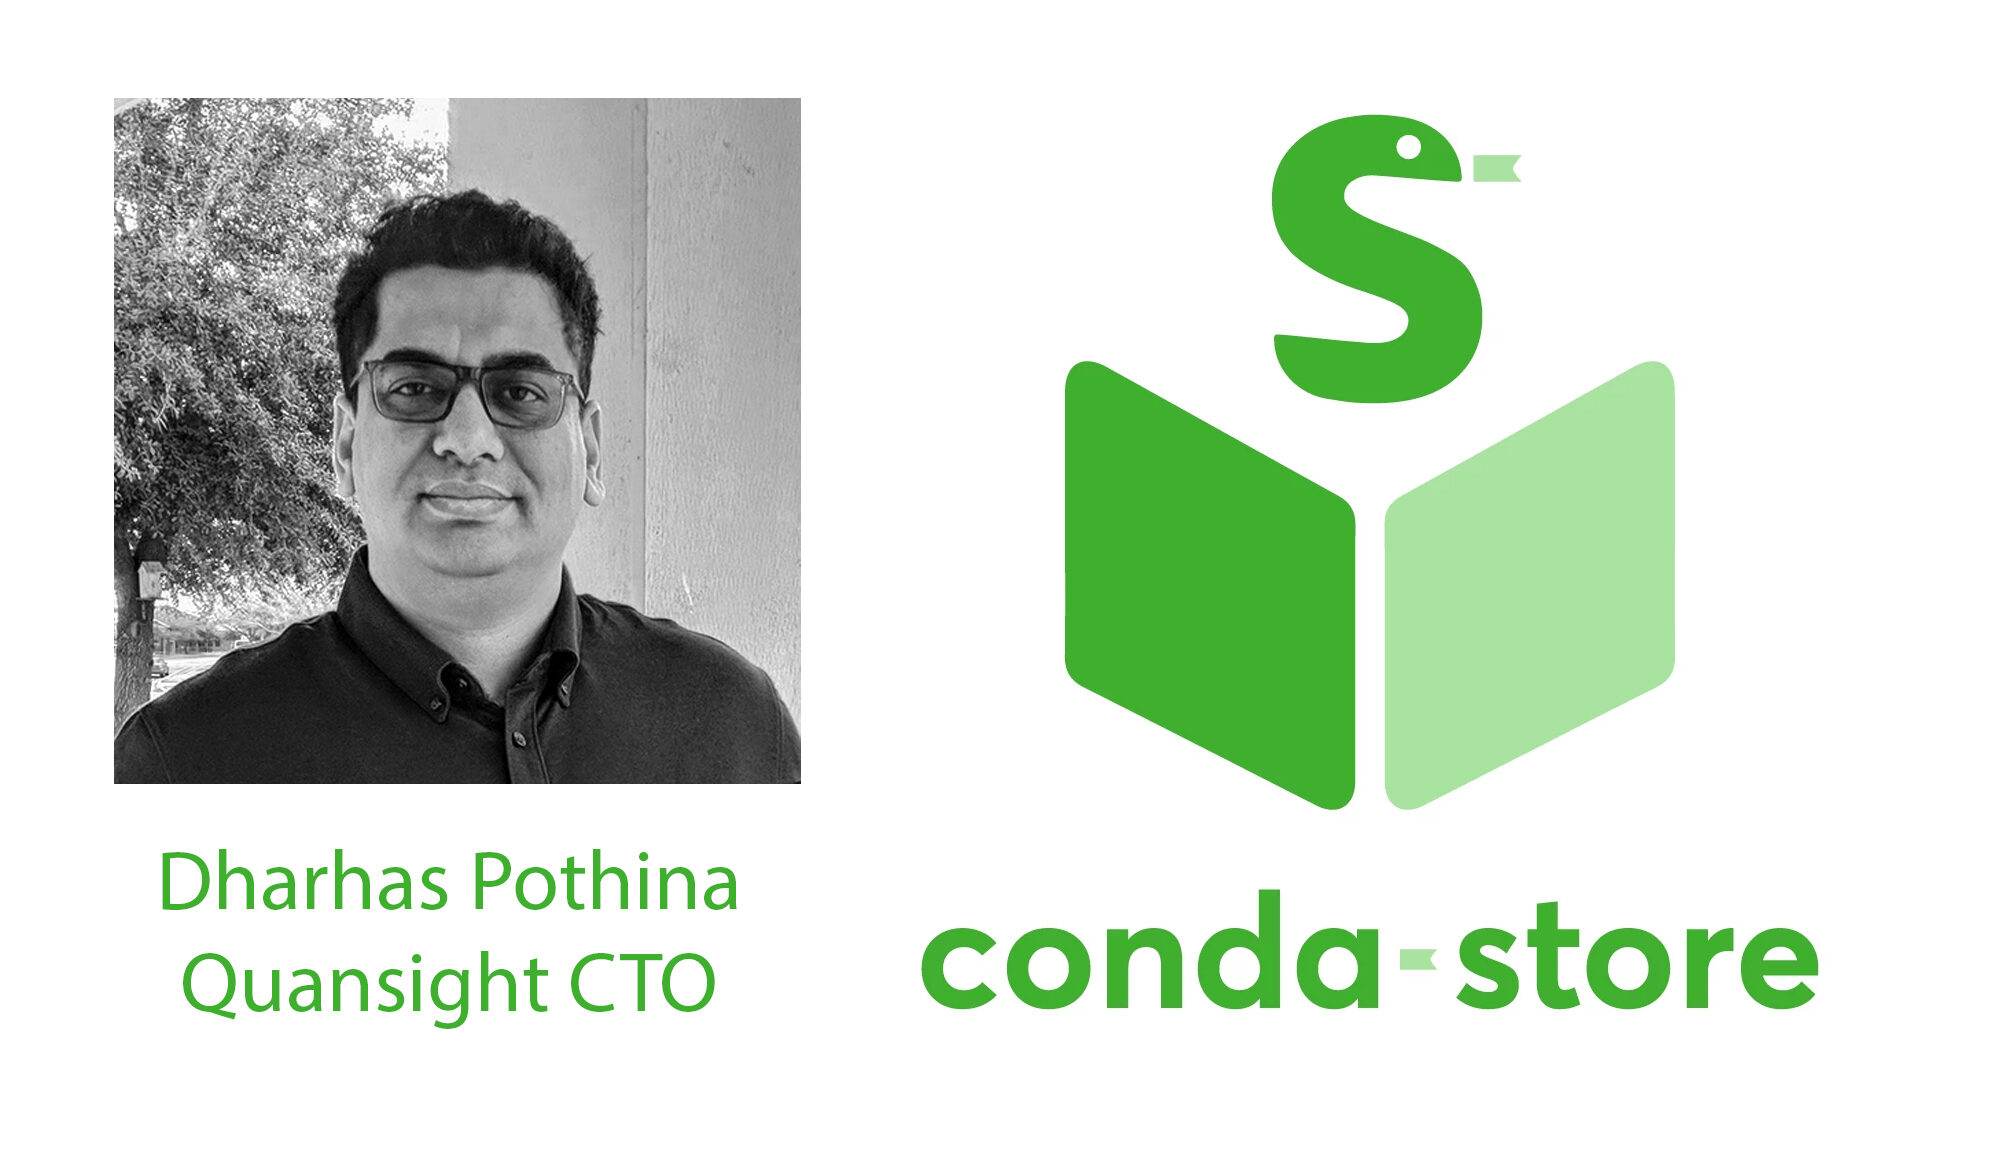 The image shows a photo of Dharhas Pothina, and the conda-store logo.